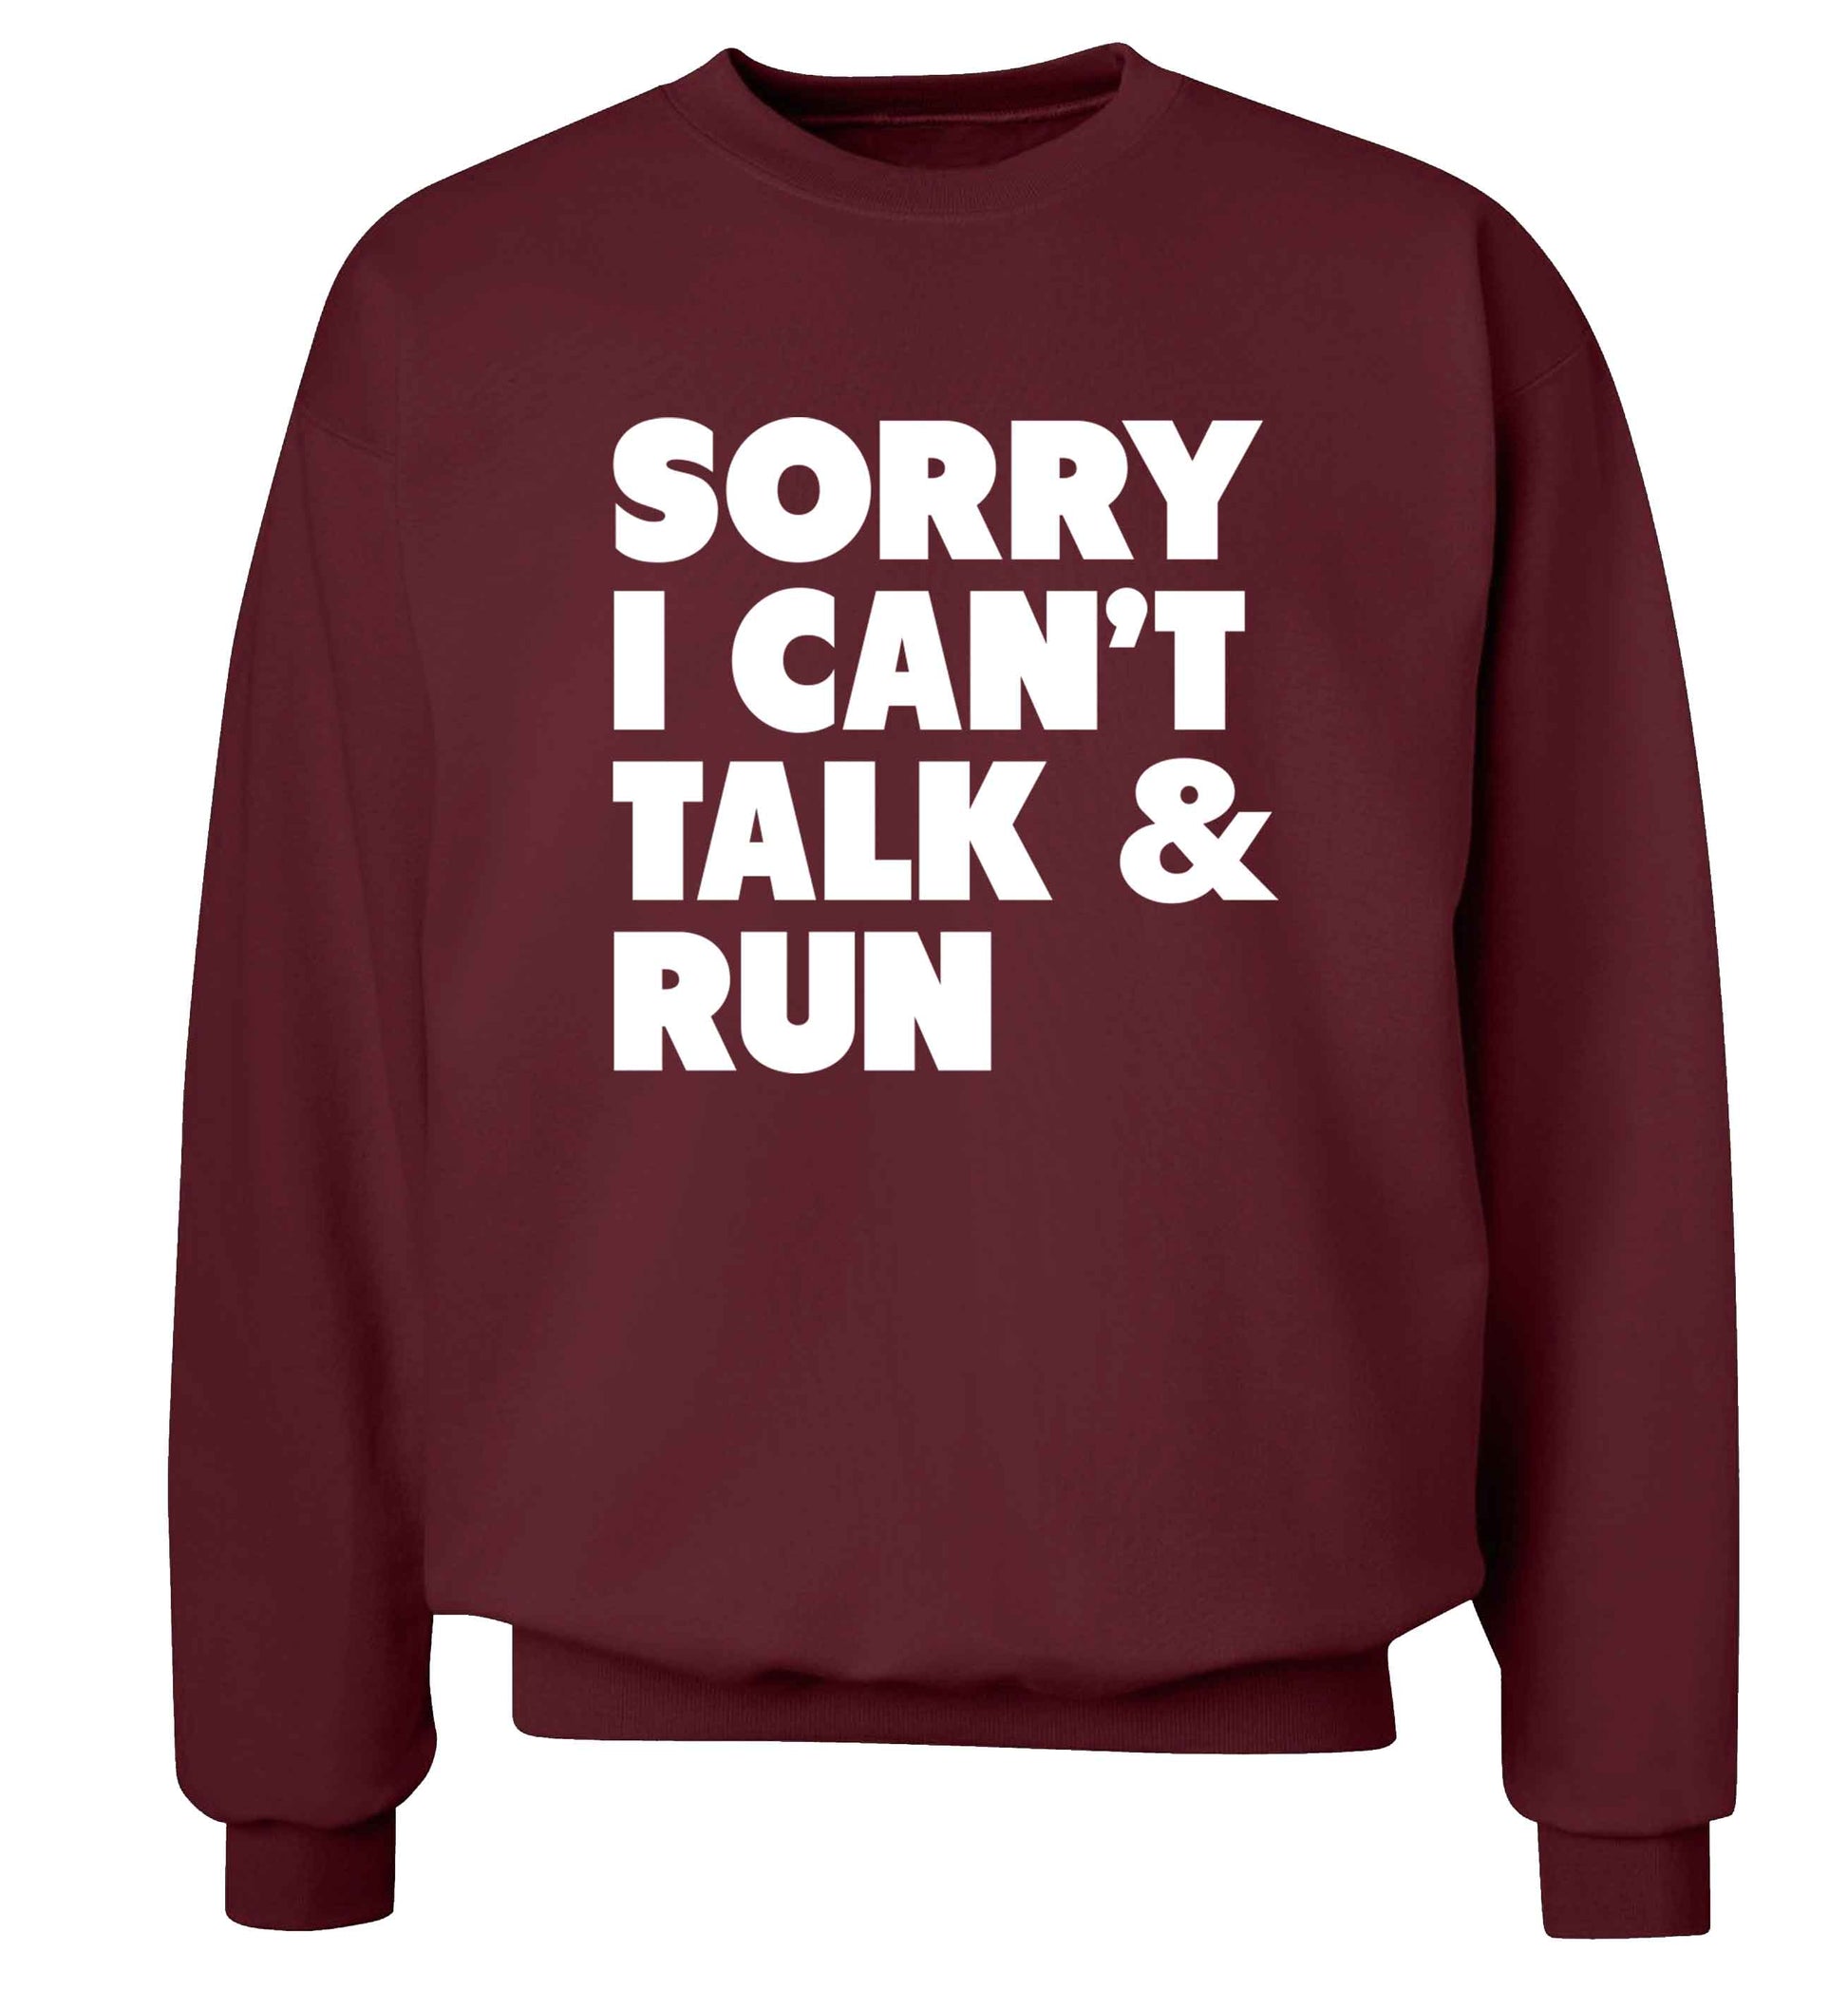 Sorry I can't talk and run adult's unisex maroon sweater 2XL